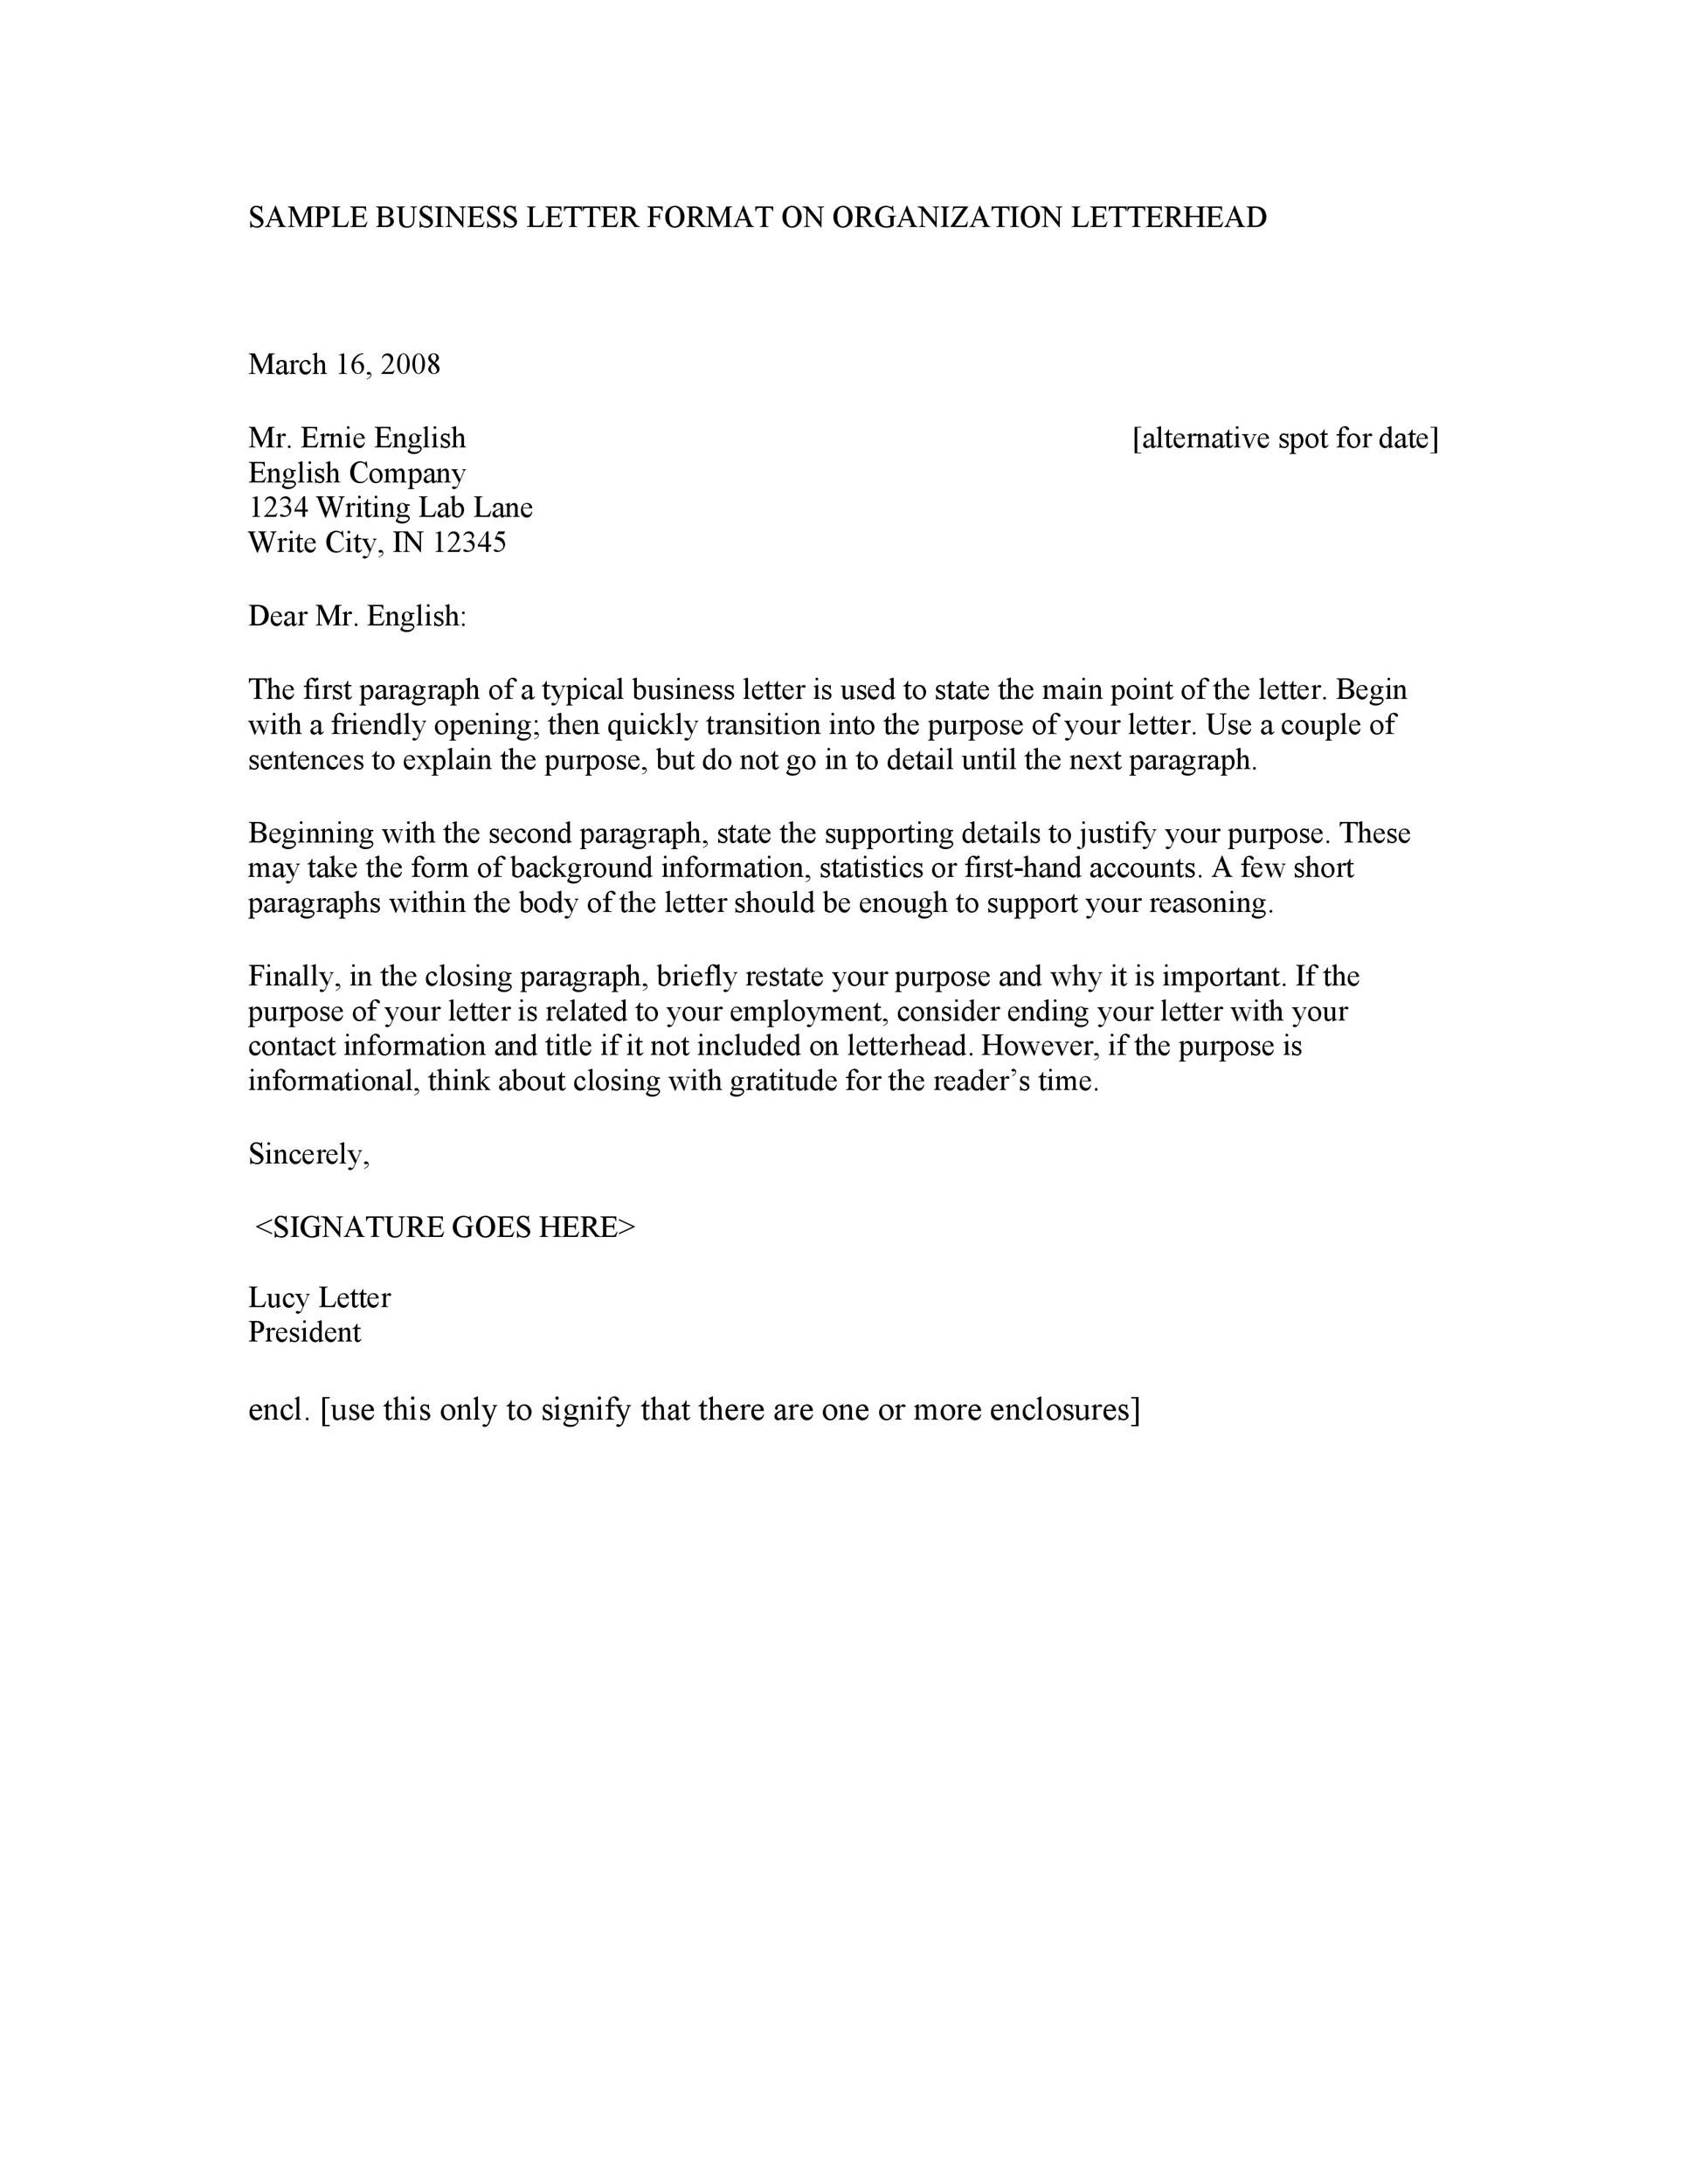 35 Formal / Business Letter Format Templates & Examples ...